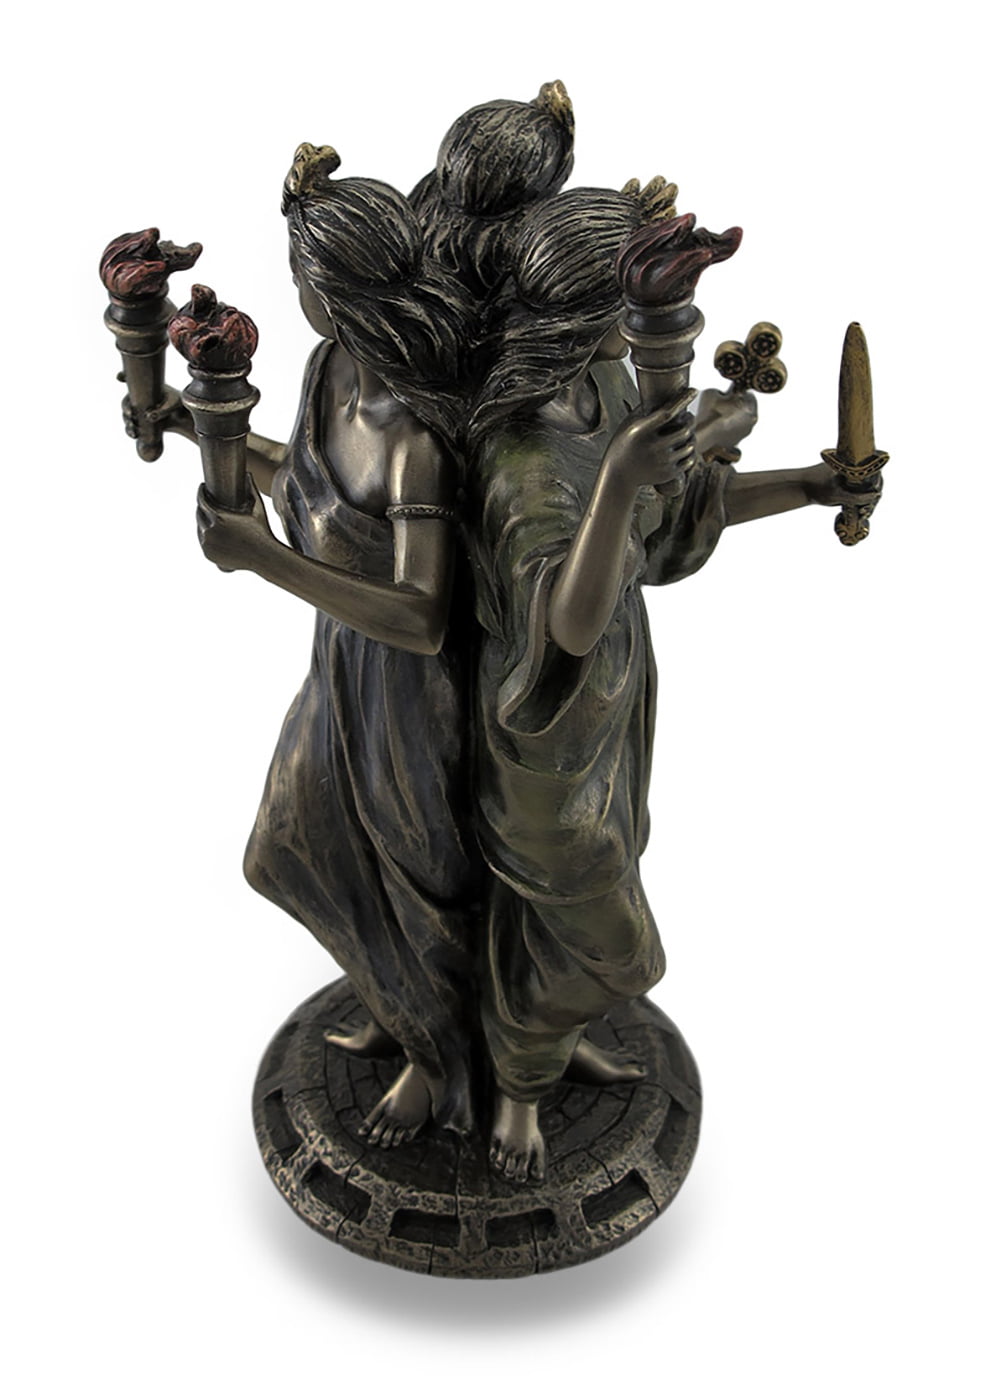 Goddess Hecate Greek Wicca Pagan Protection Magic & Witchcraft Statue 11" Tall 